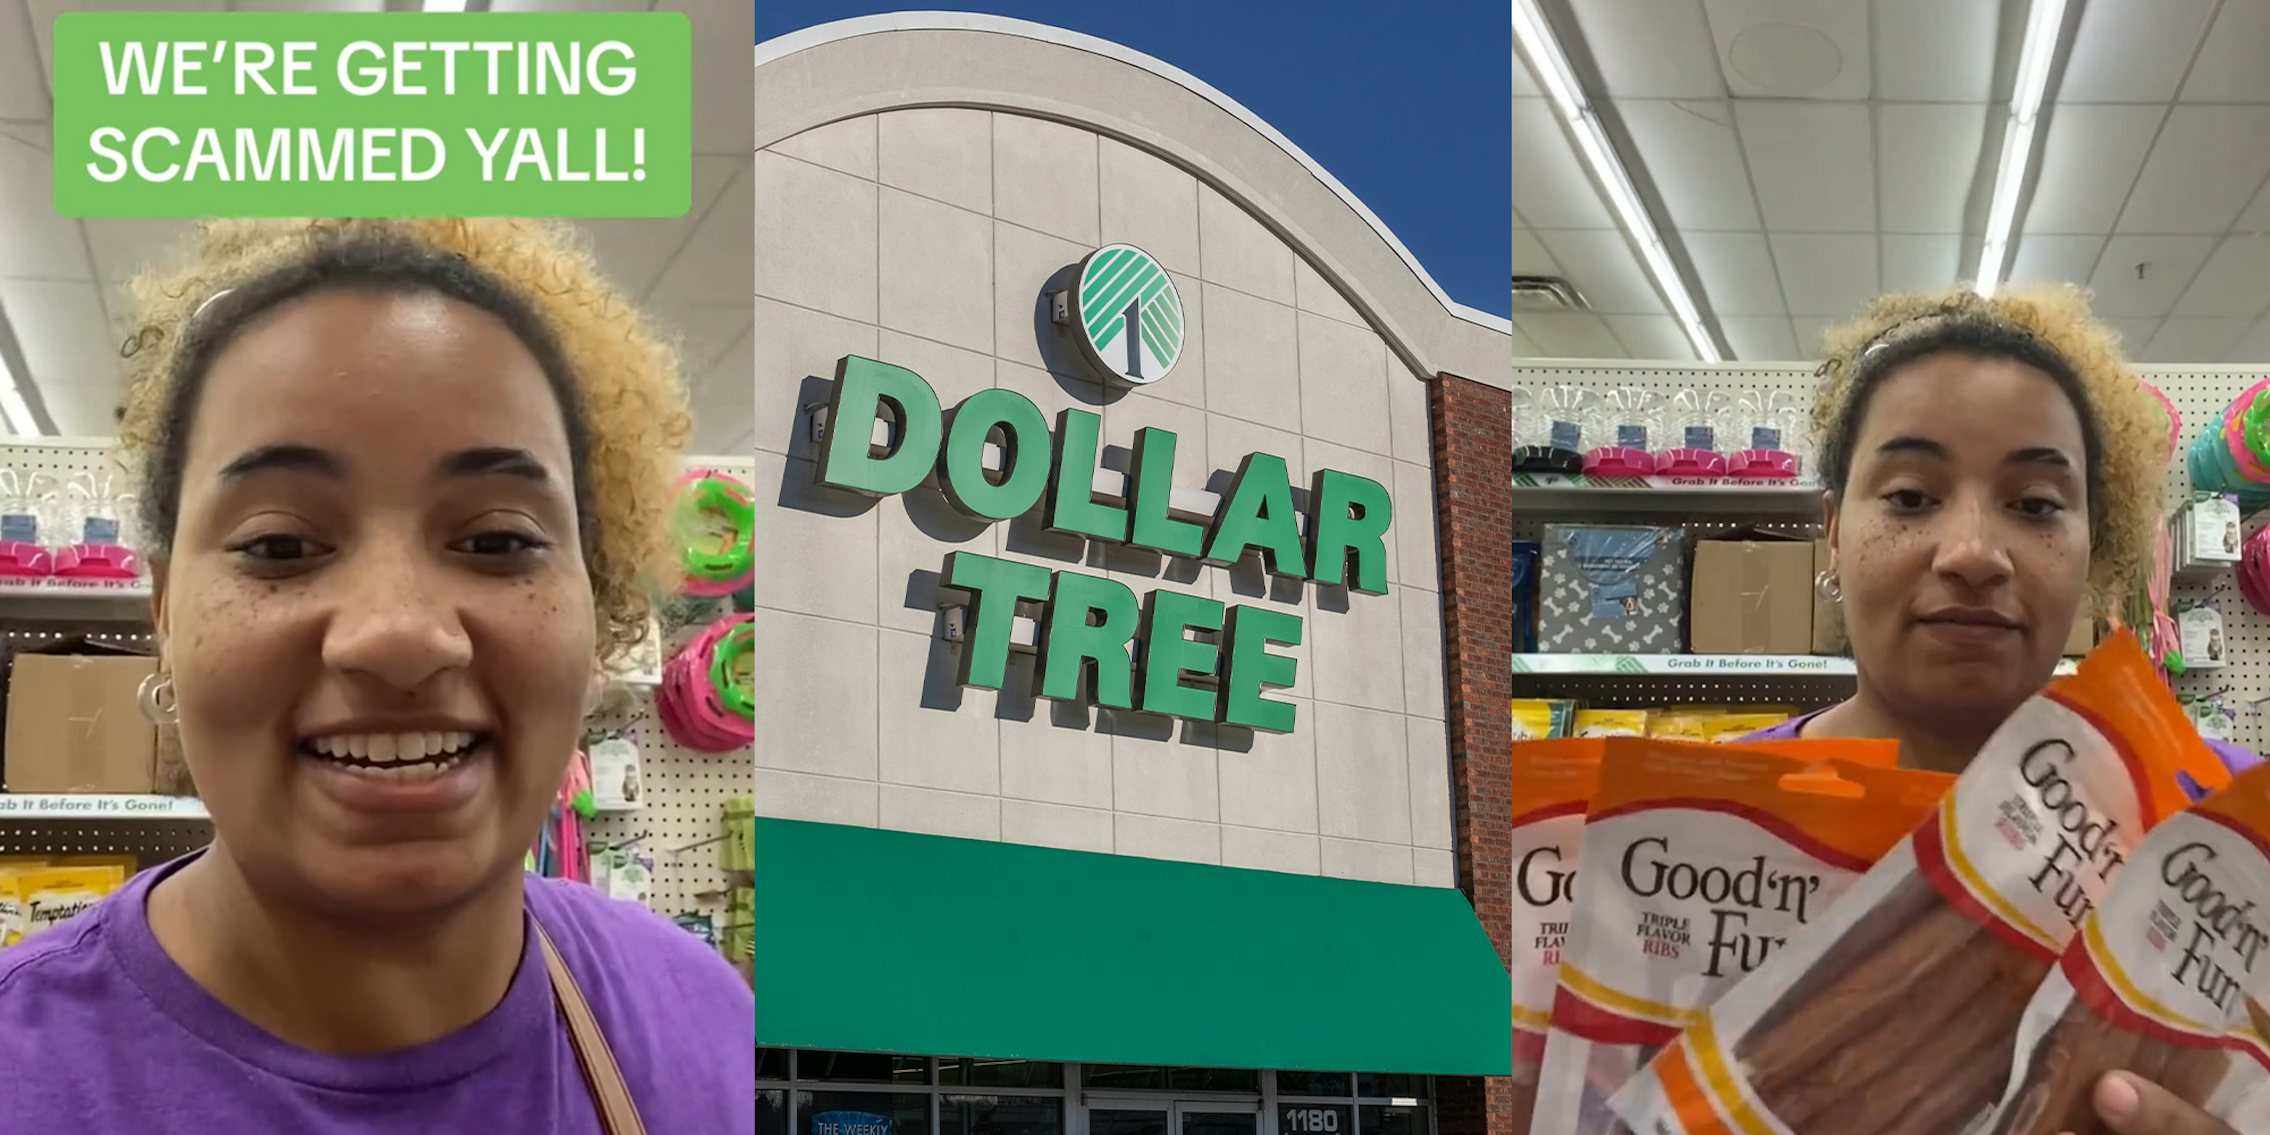 Shopper finds dog treats for $1 at Dollar Tree.